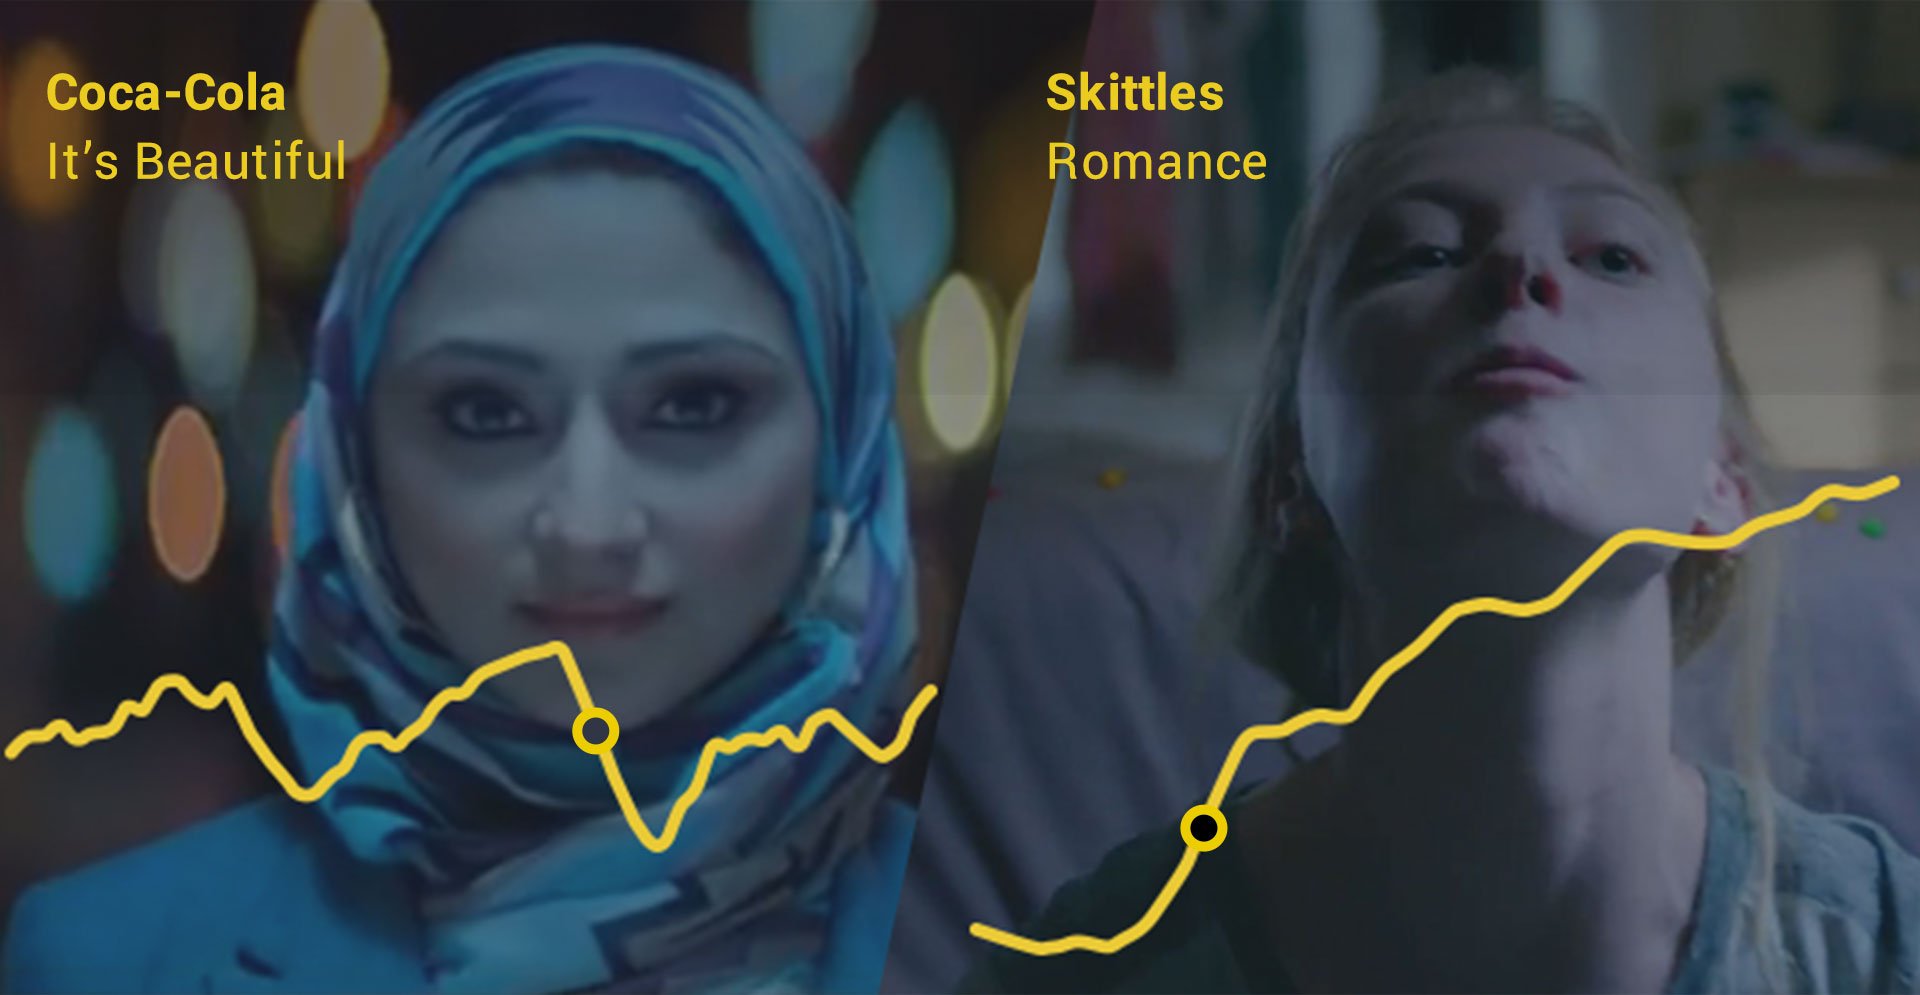 Realeyes emotion data for Coca-Cola and Skittles